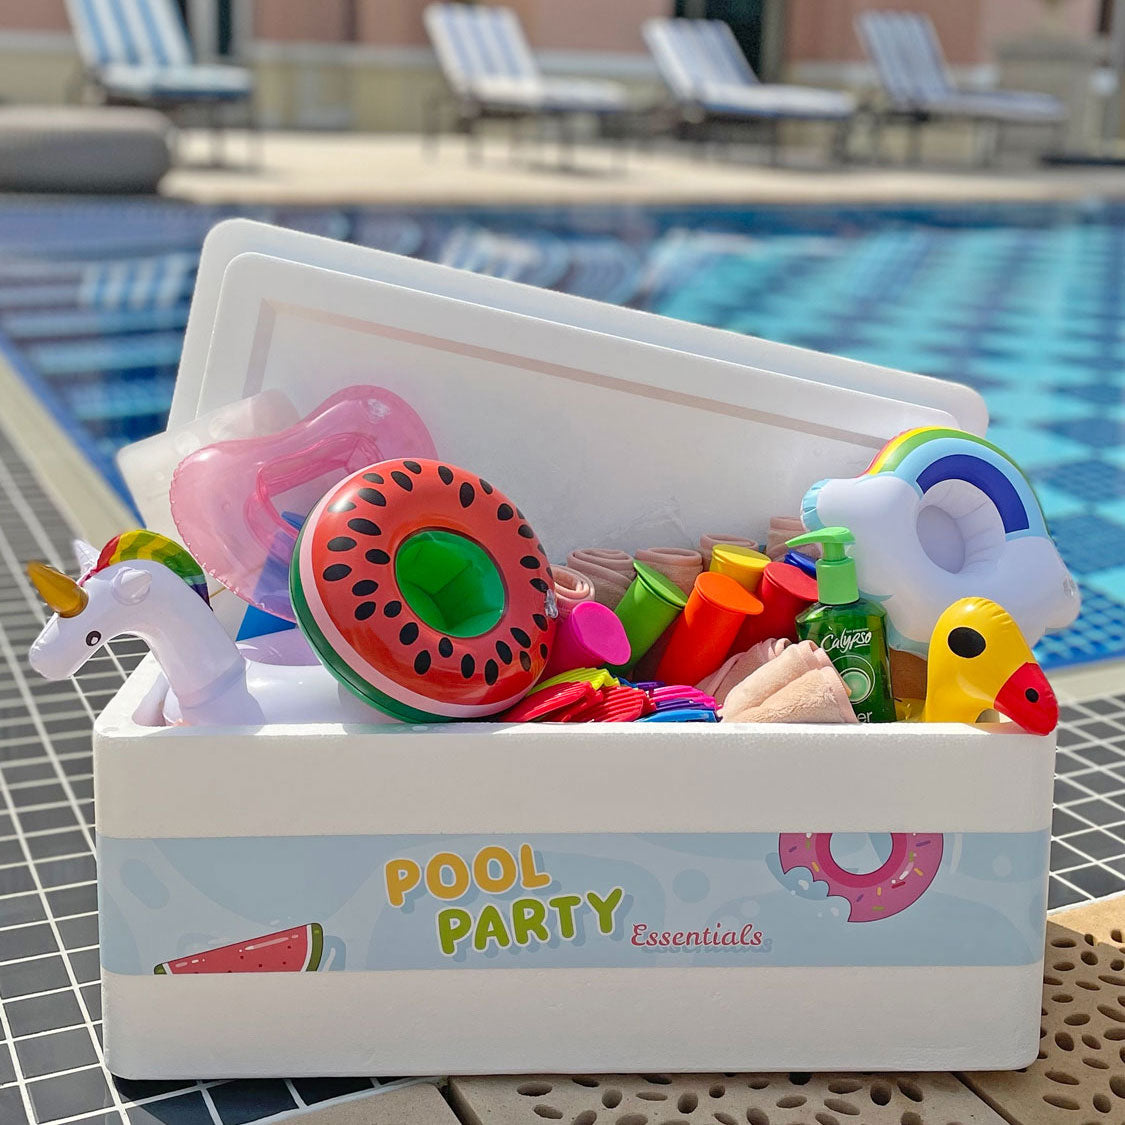 Pool Party Essentials